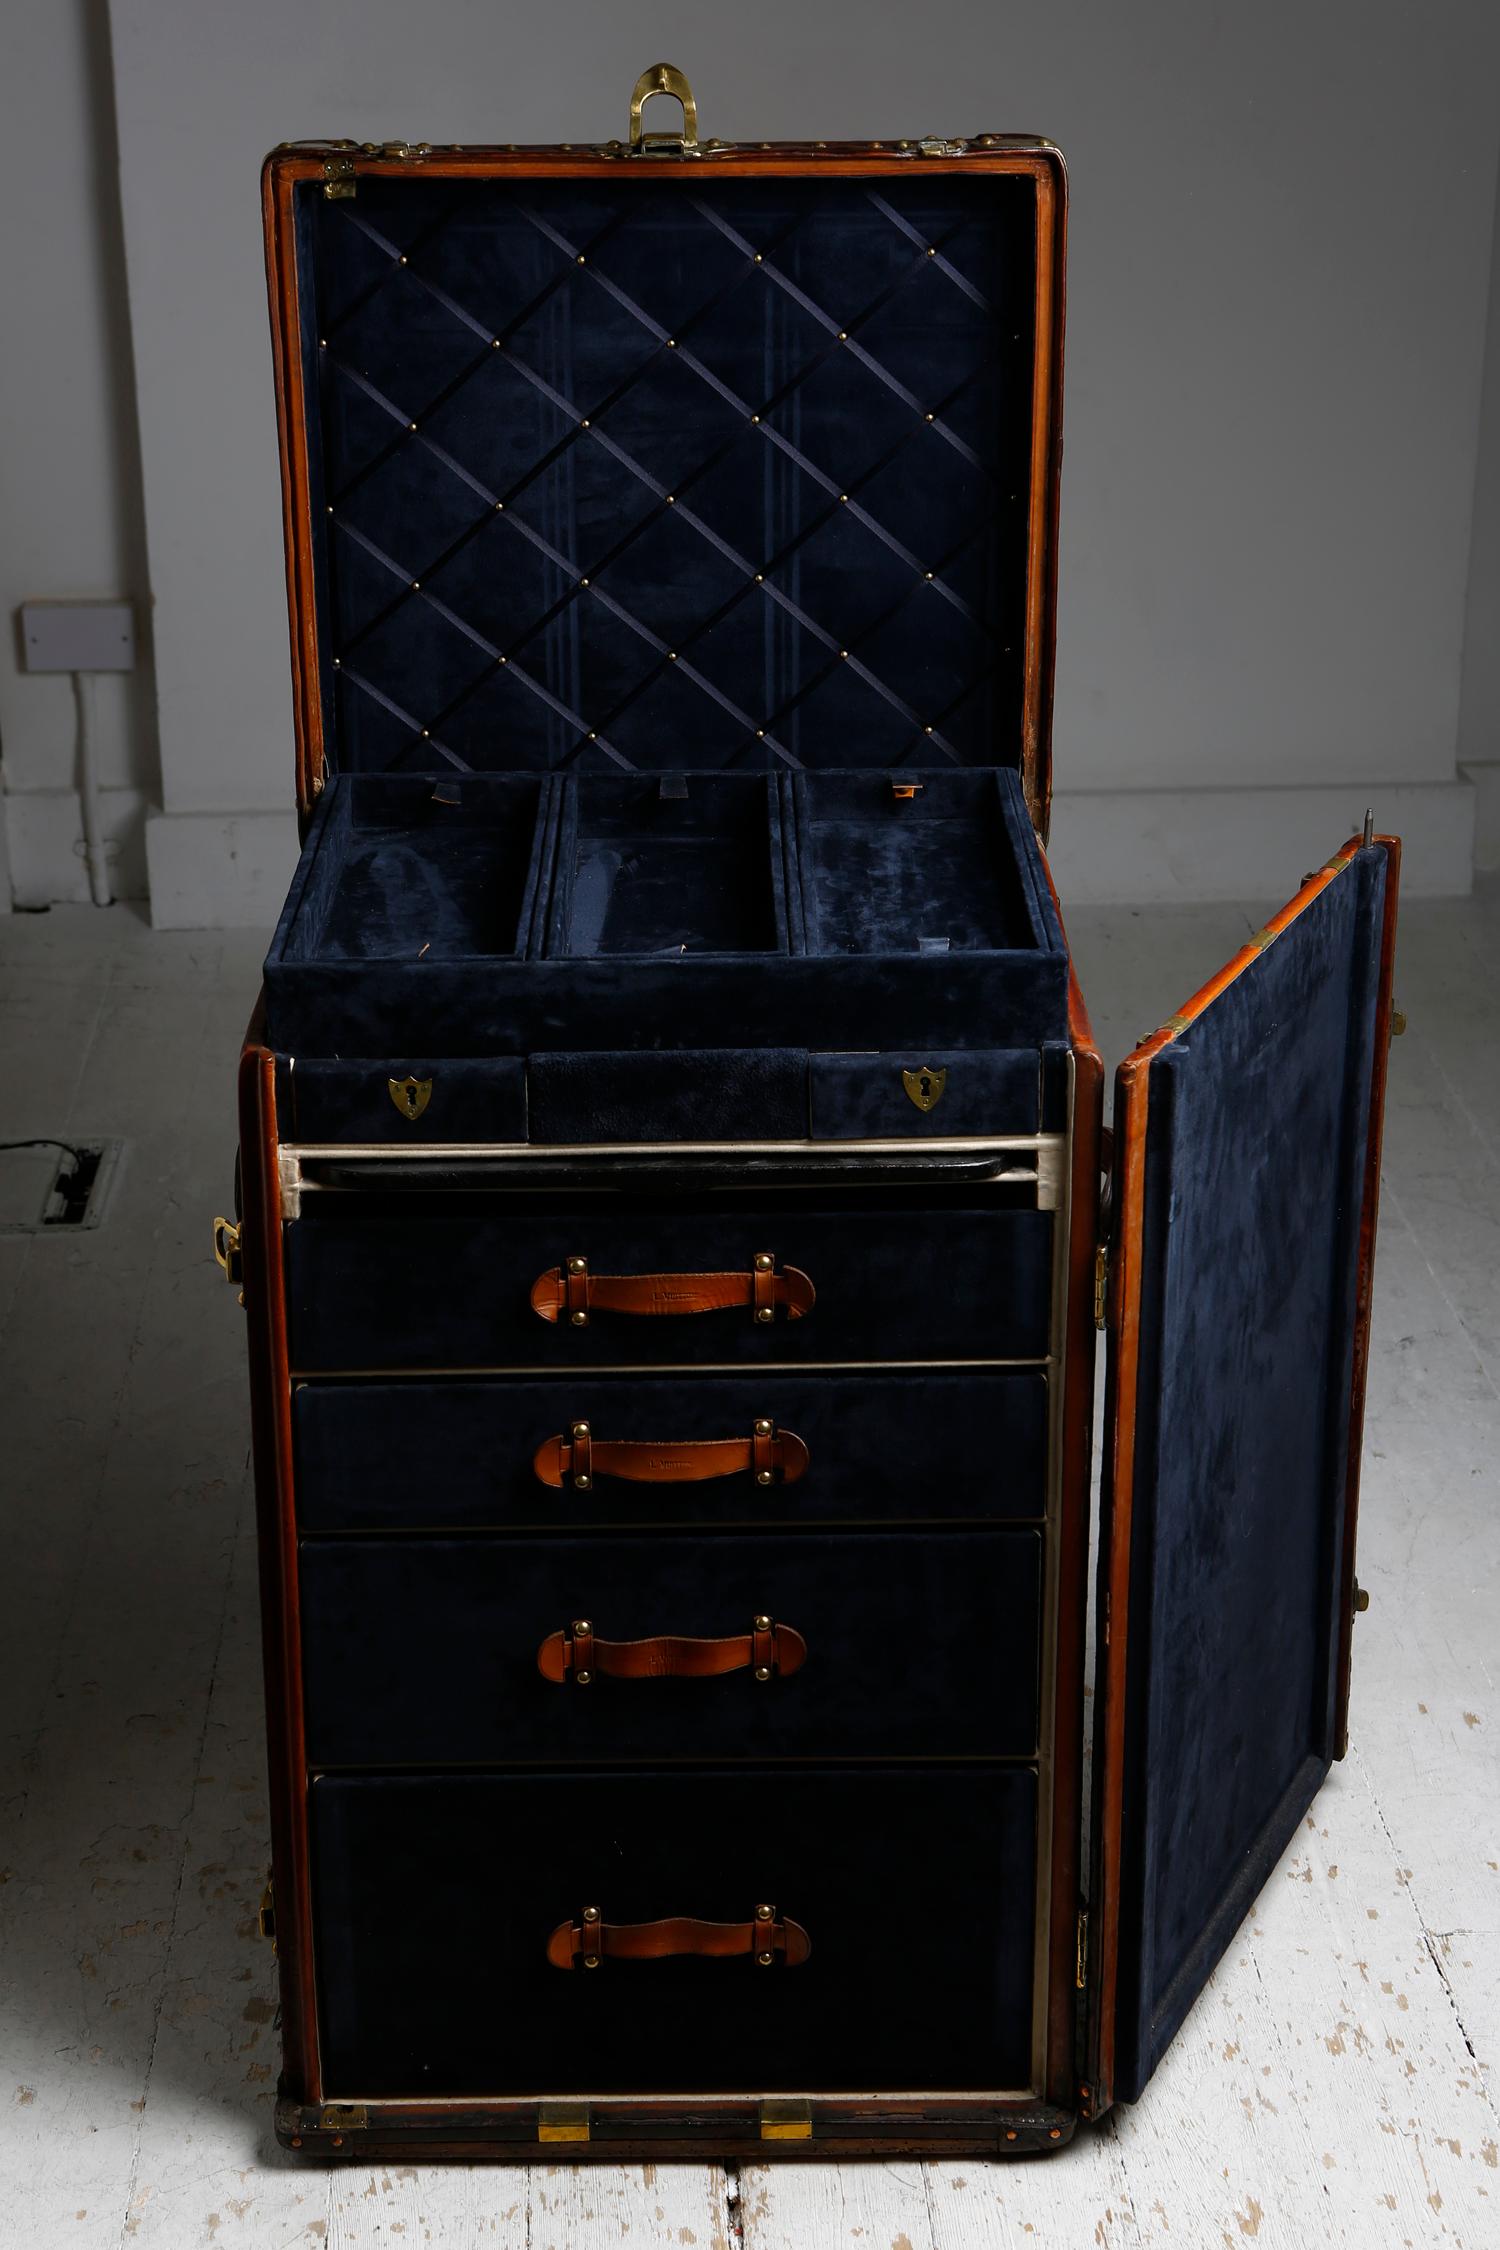 Louis Vuitton Ladies Lingerie Desk Trunk in Orange with Mahogany Finish, 1914 For Sale 5